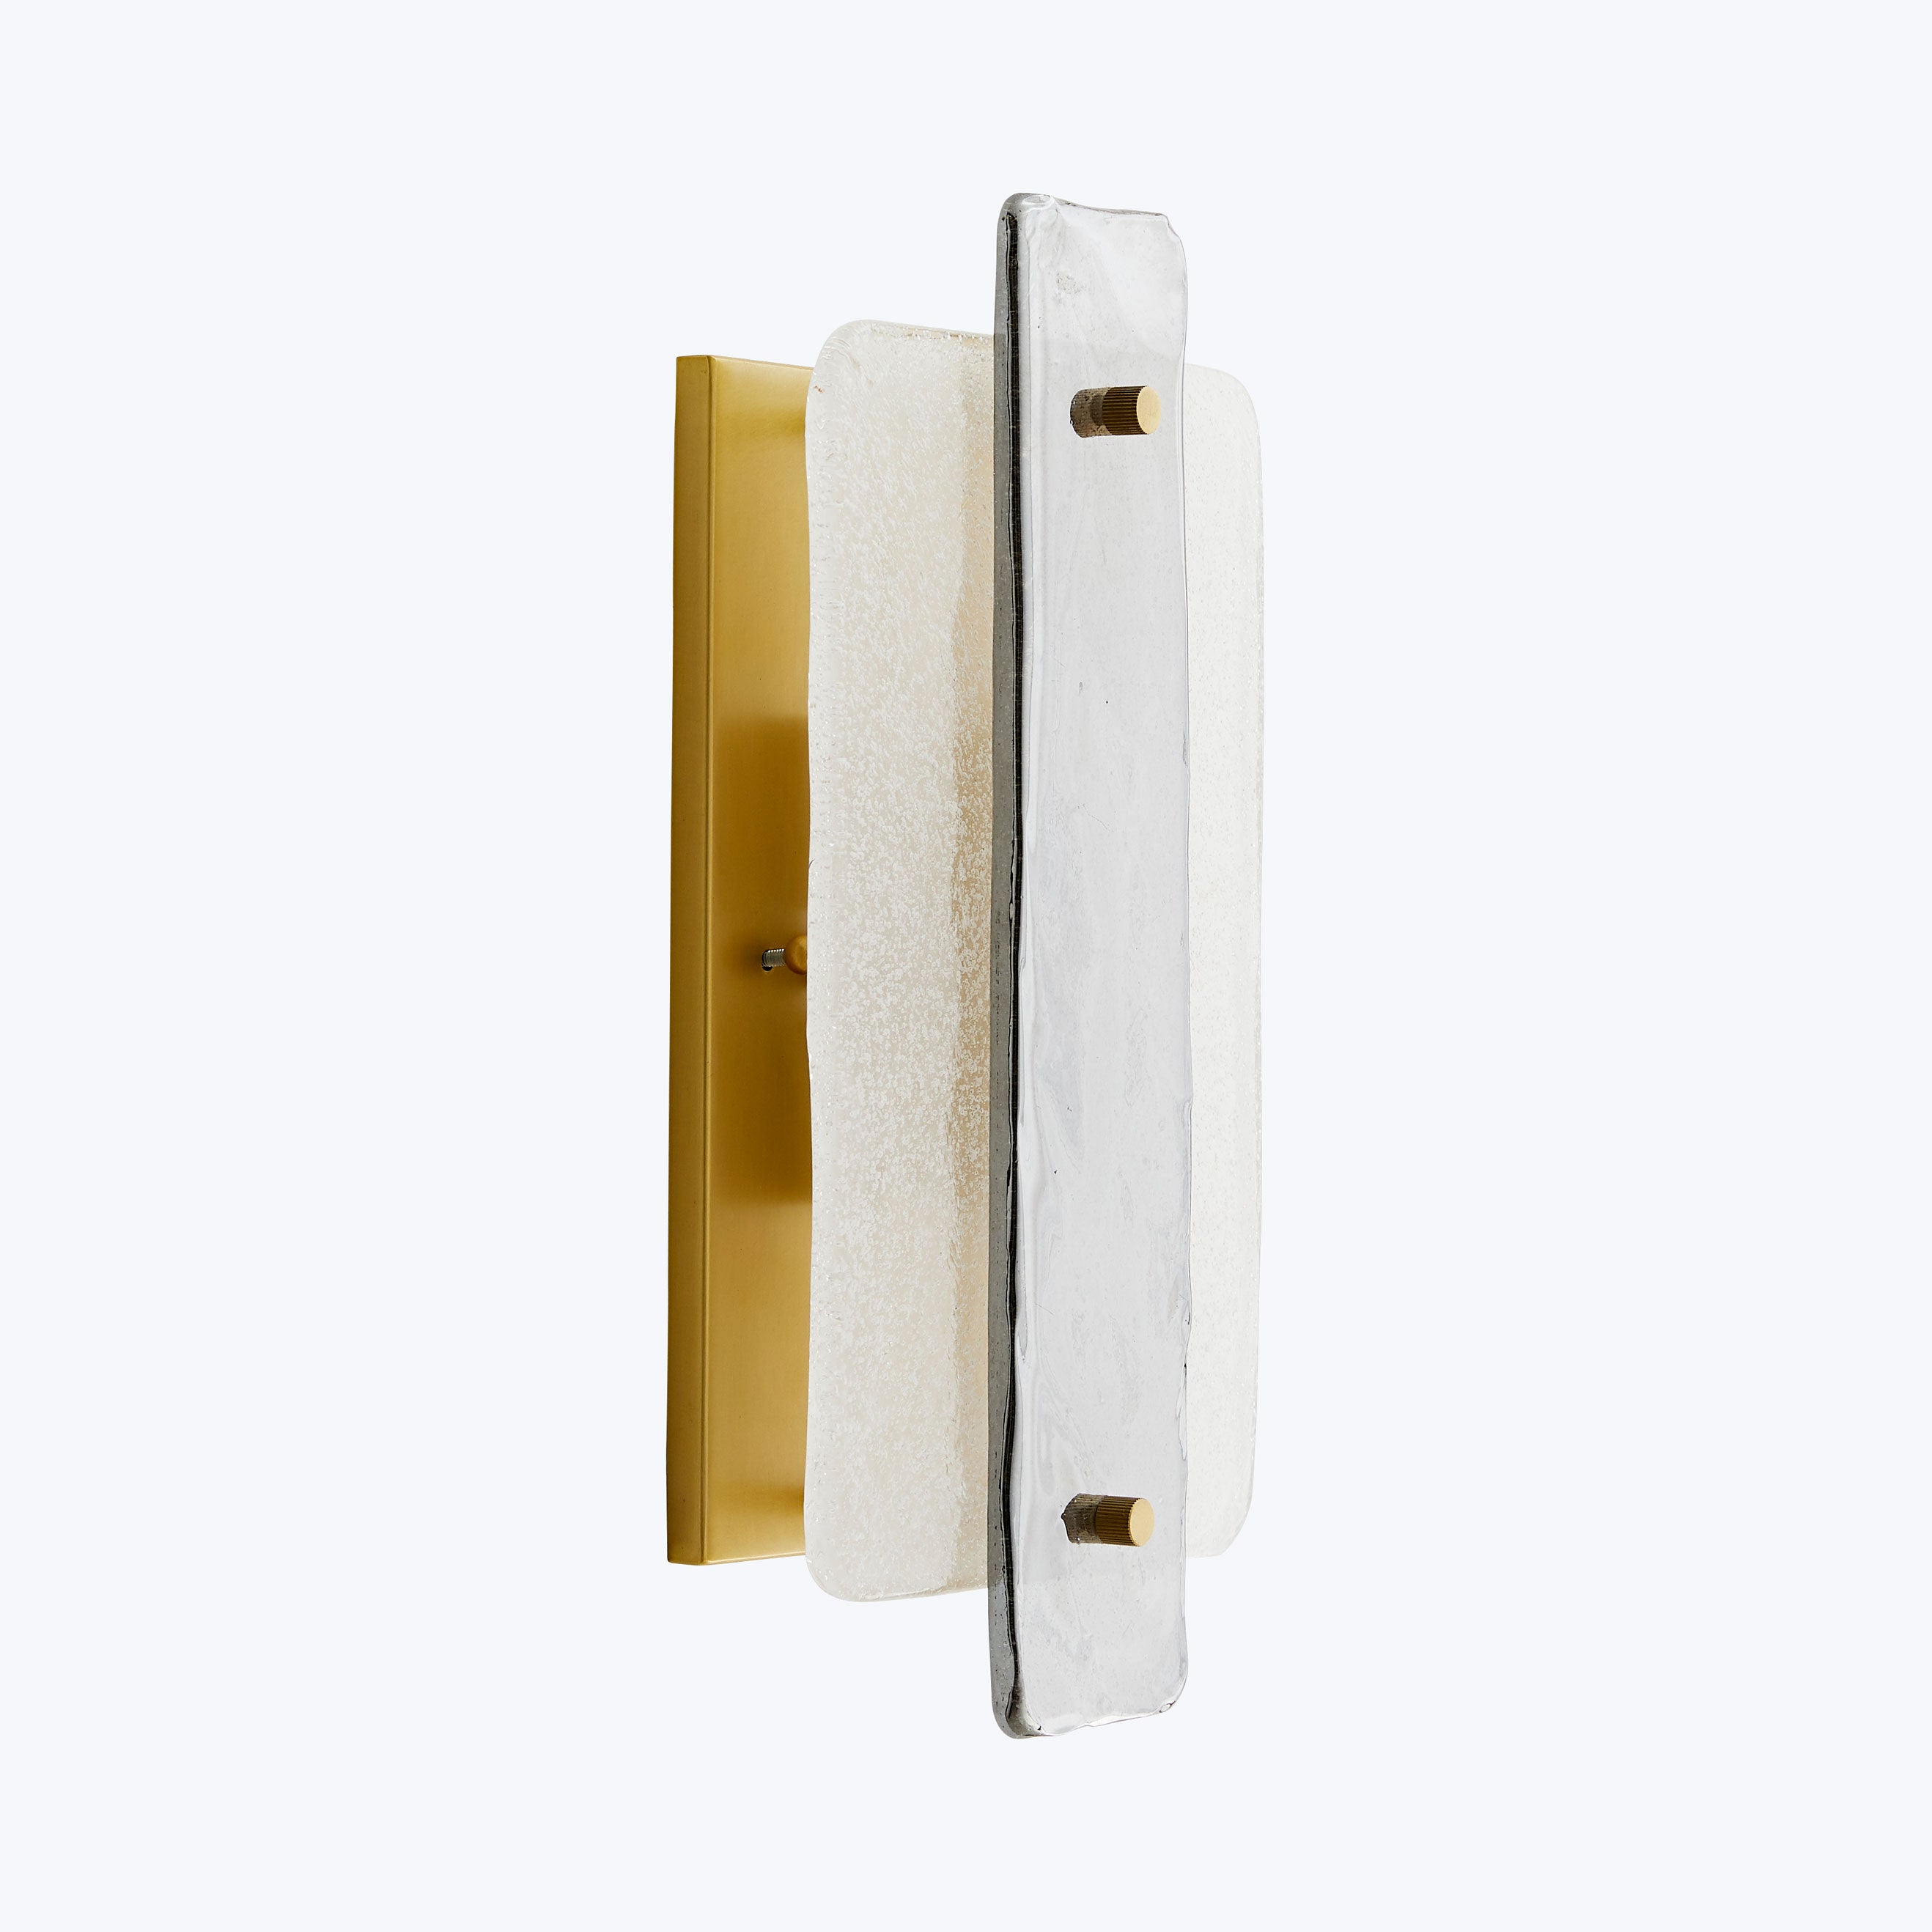 Modern white lever door handle with golden backplate and keyhole.